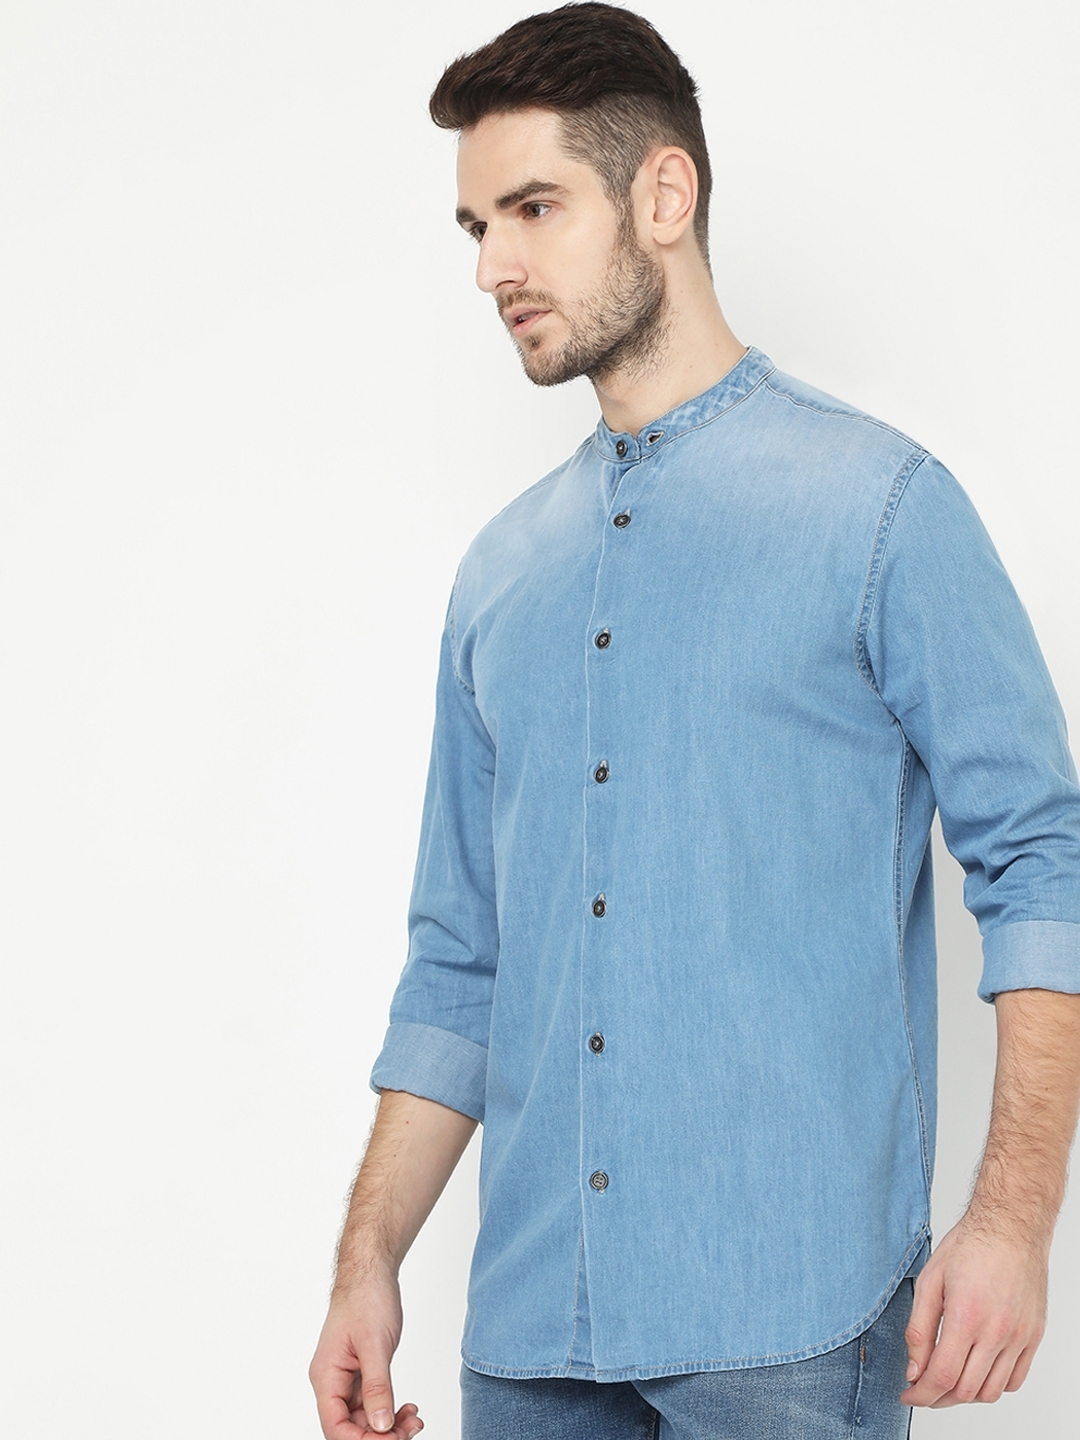 Mens Casual Denim Denim Shirts For Men With Mao Neck Mandarin Collar  Fashionable Long Sleeve Blouse For Casual And Formal Occasions D40 From  Blairi, $16.24 | DHgate.Com